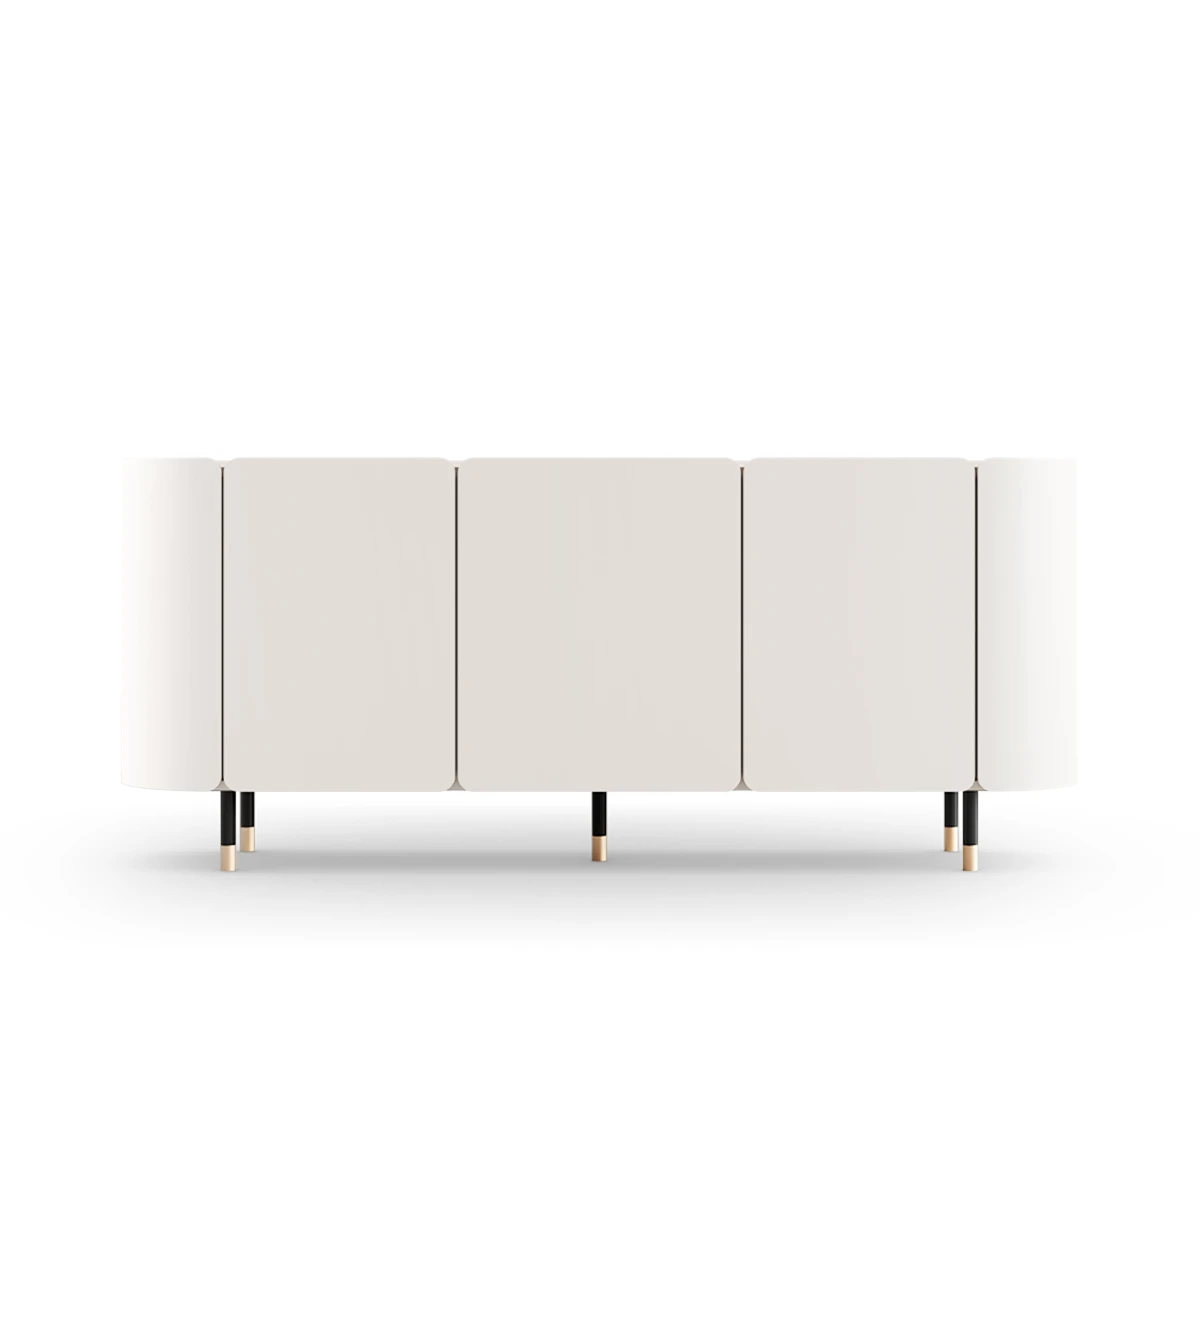 Sideboard with 3 doors and pearl lacquered frame, interior glass shelves, black lacquered legs with gold detail.